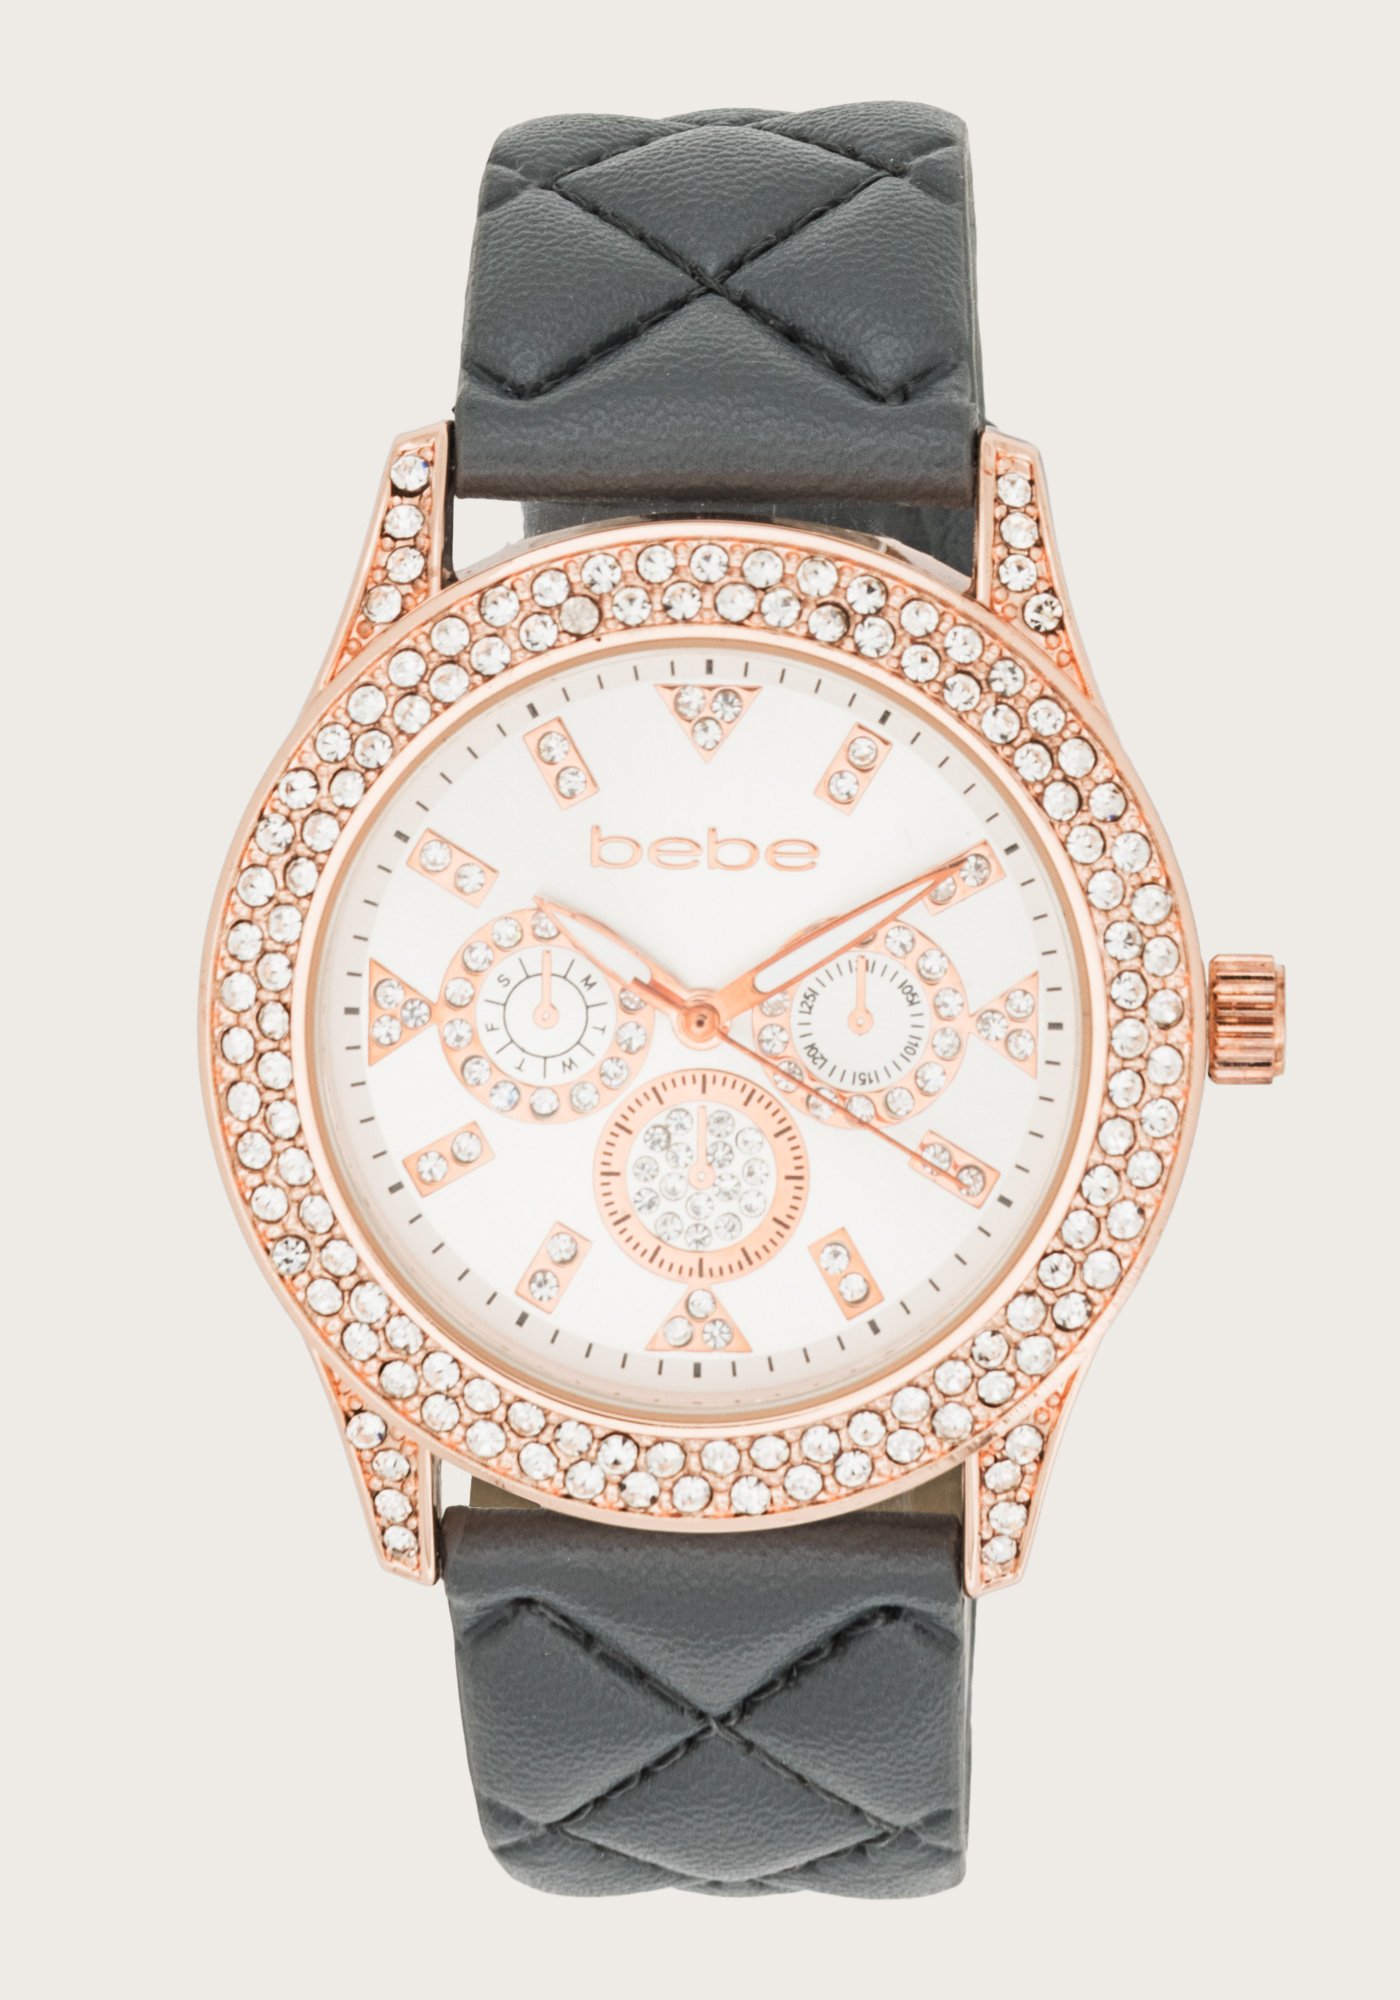 Bebe Women's Quilted Strap Crystal Watch Leather